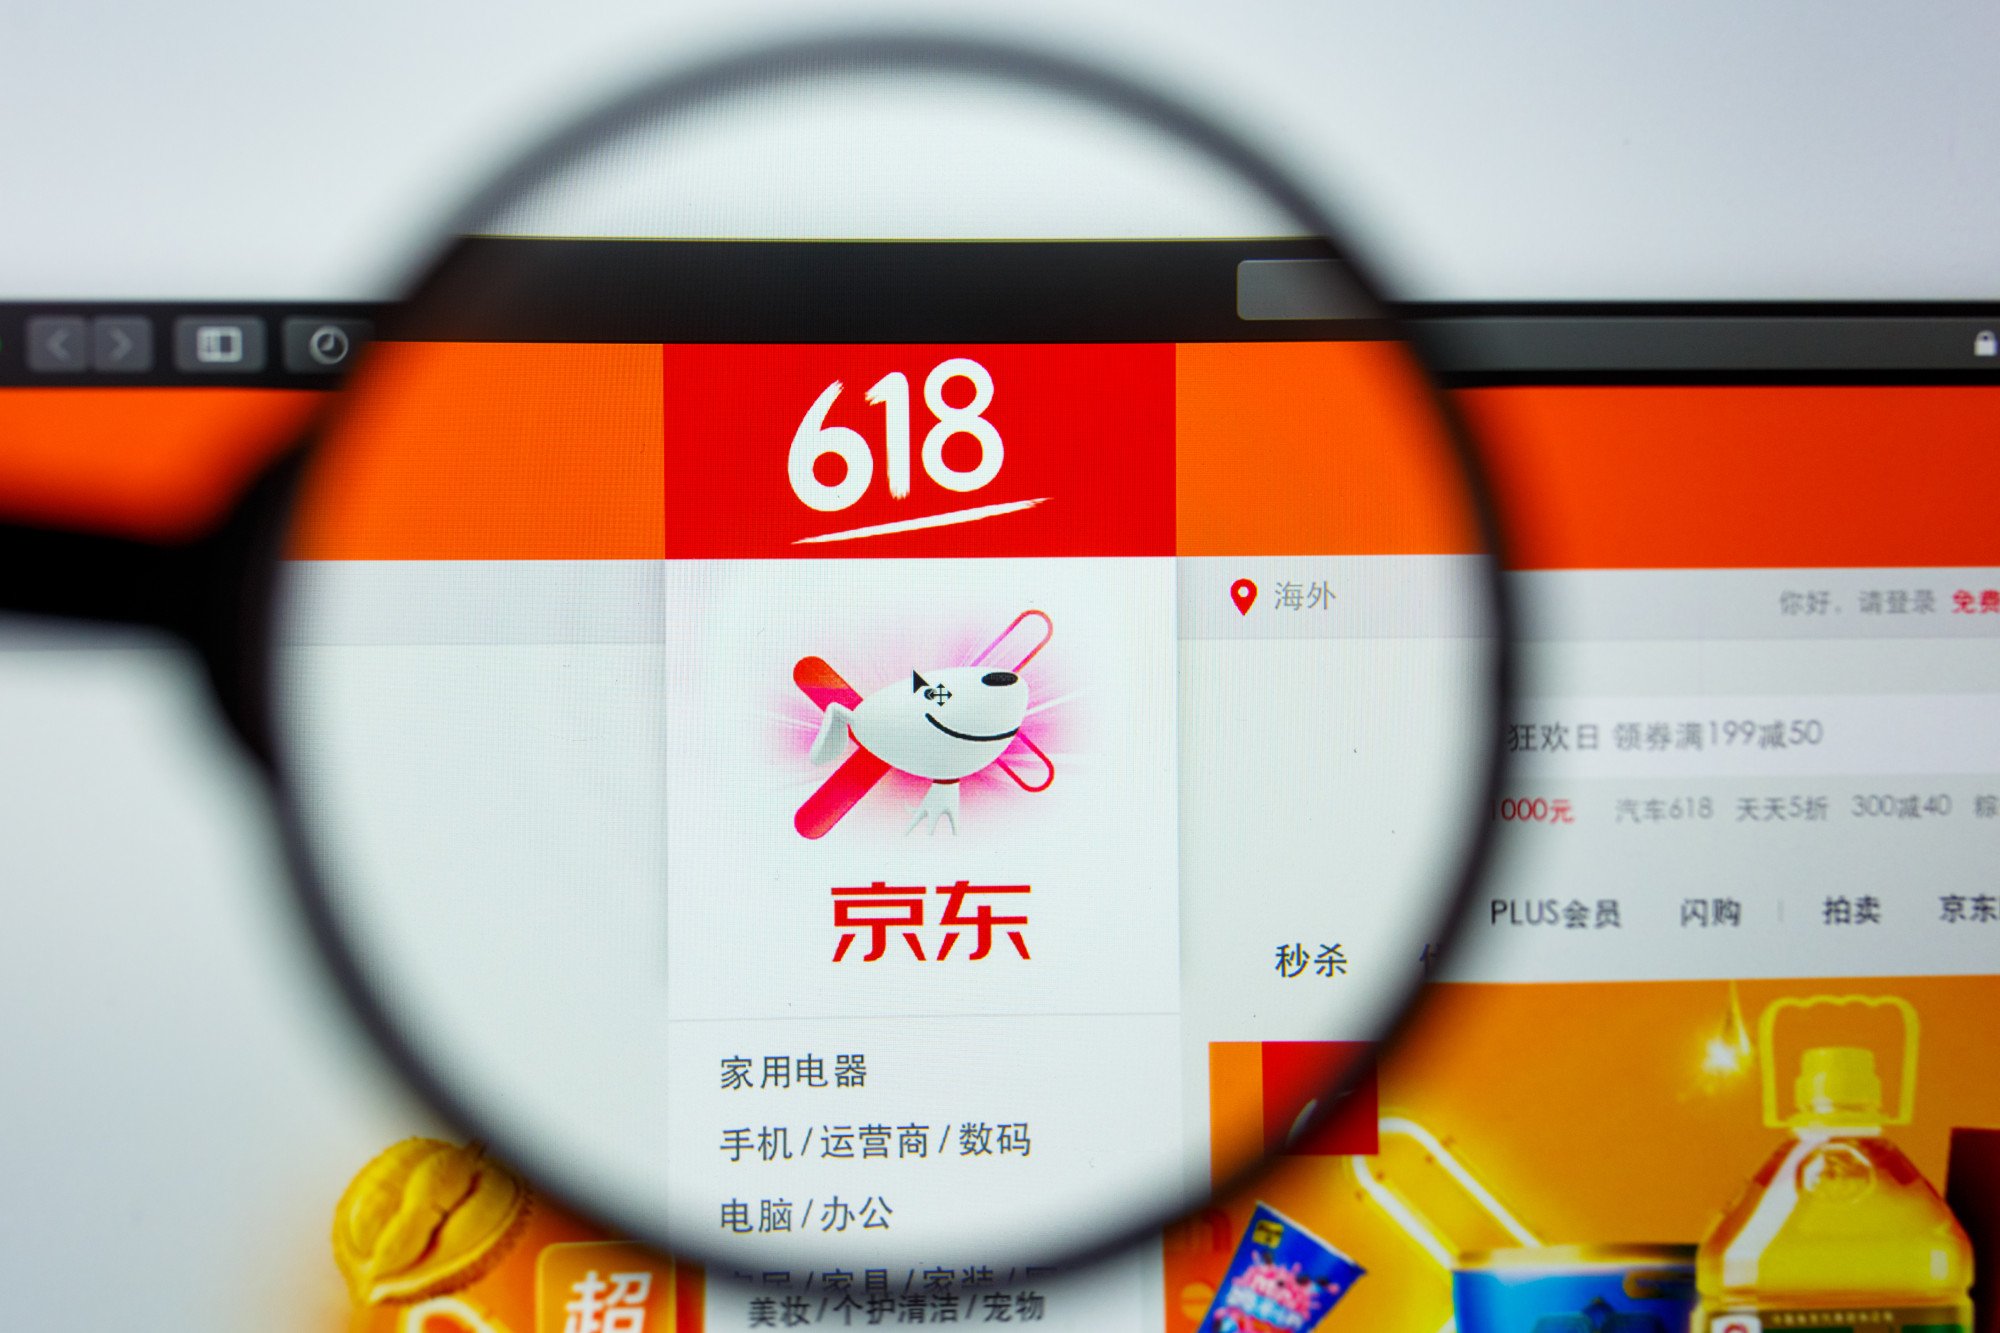 JD.com started the 618 shopping festival in 2004 as a simple sales promotion to celebrate its June 18 founding anniversary. Photo: Shutterstock